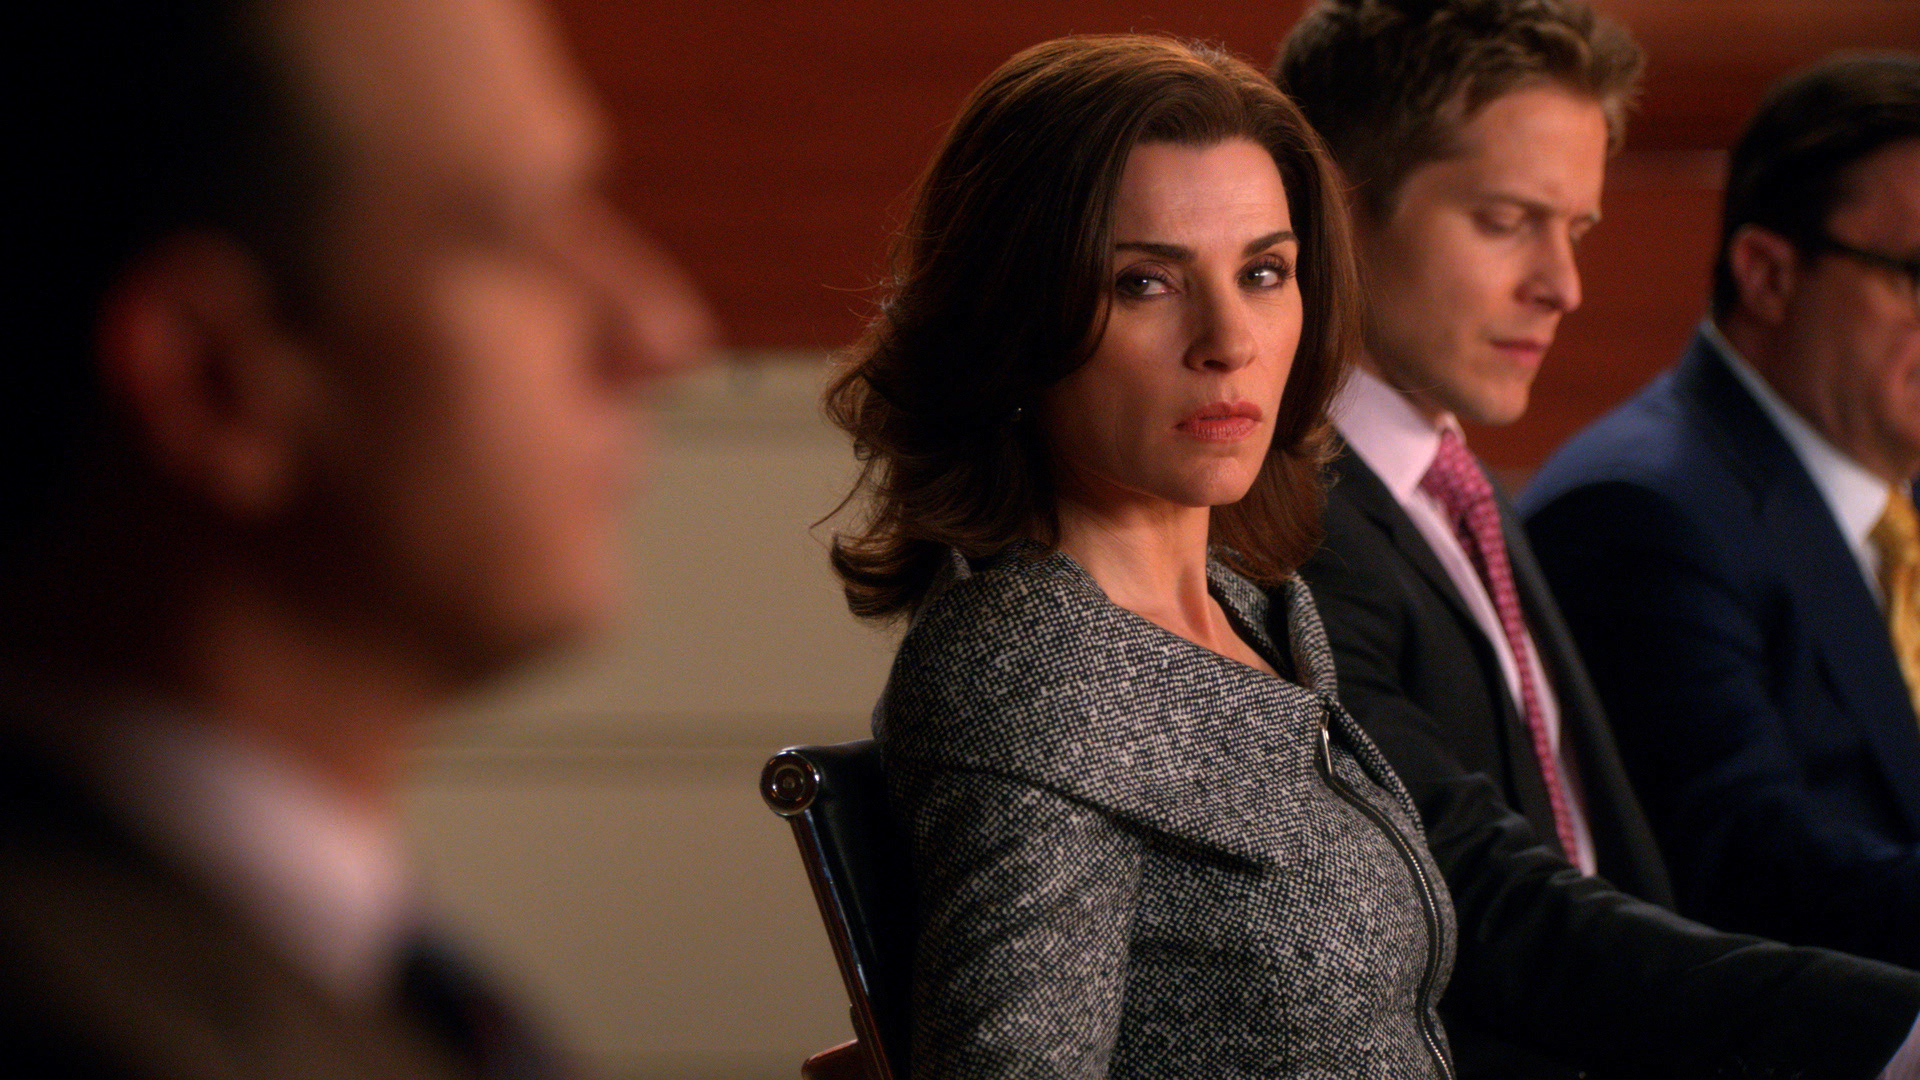 Watch The Good Wife Season 5 Episode 10 The Good Wife The Decision